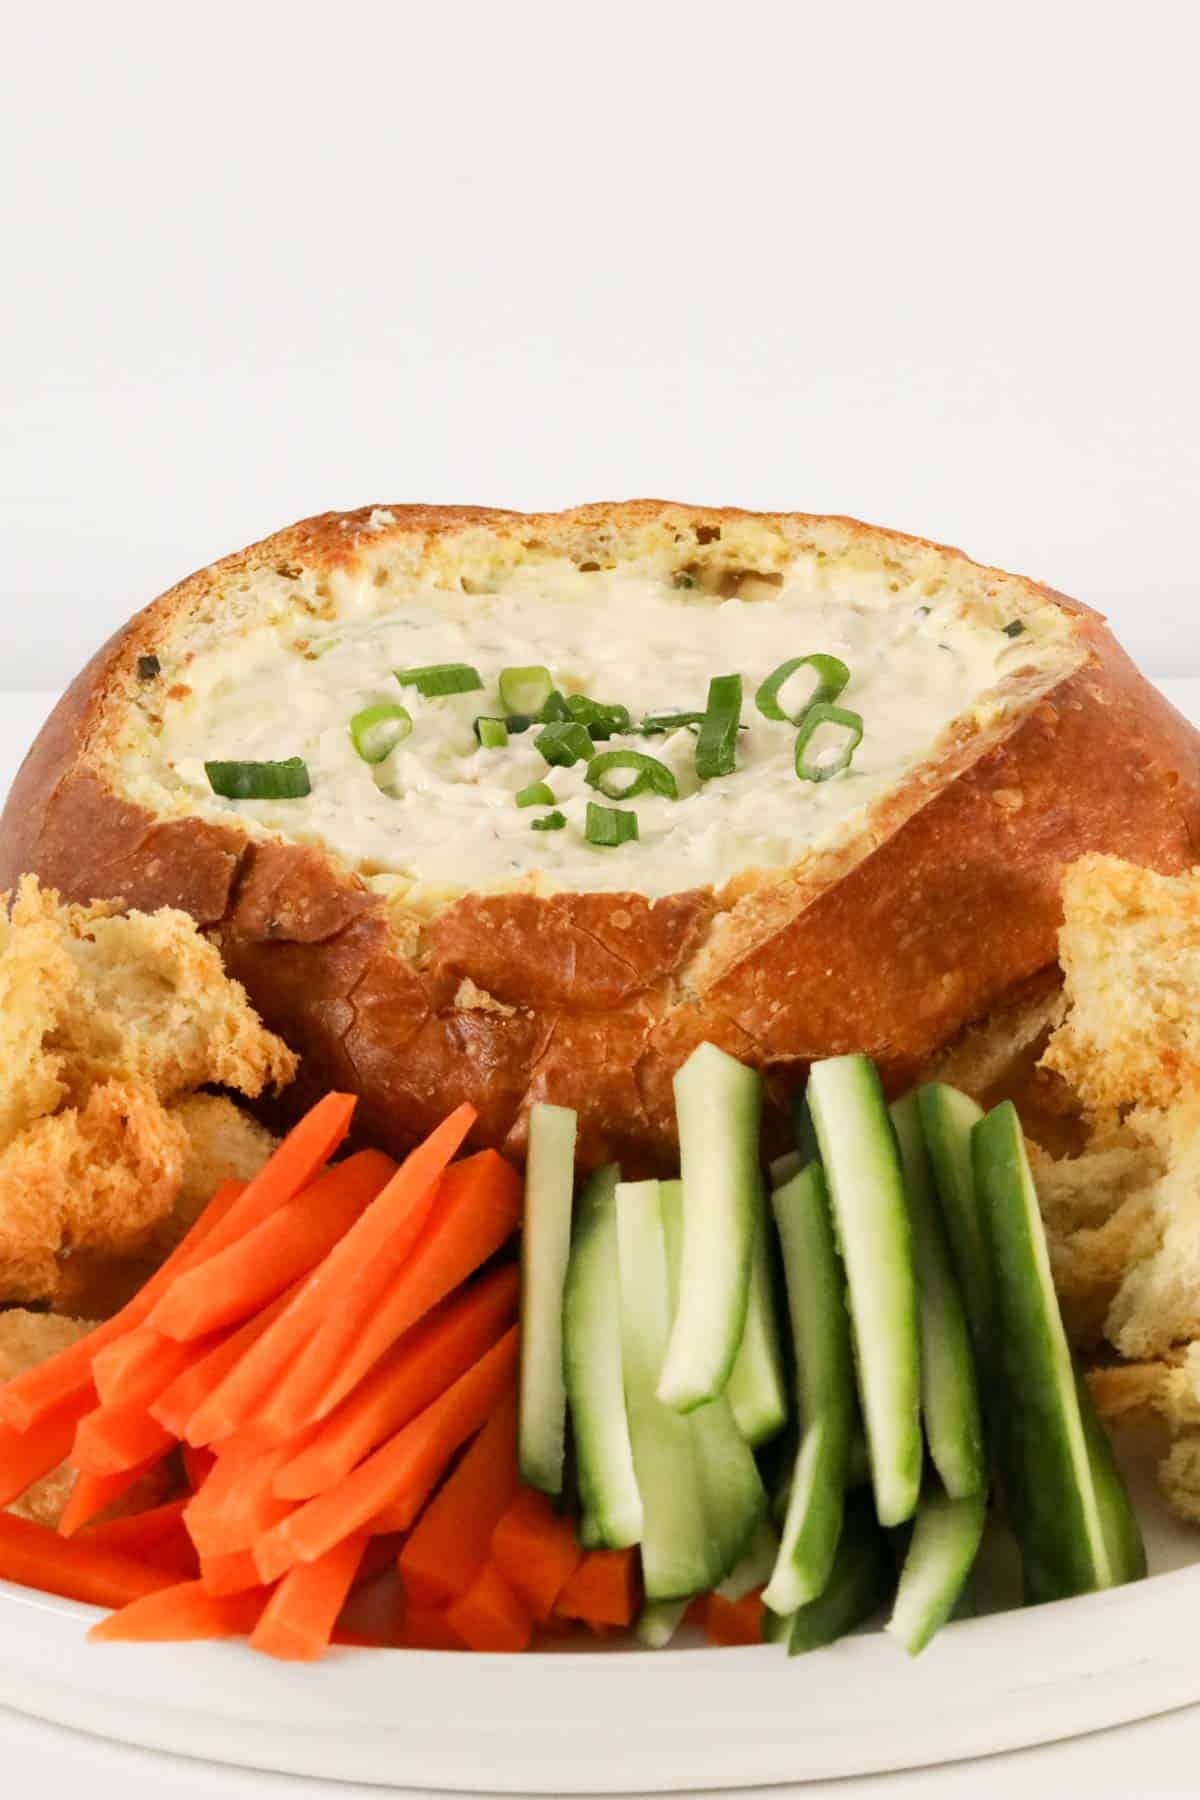 The cob loaf dip served with fresh carrot and cucumber sticks.